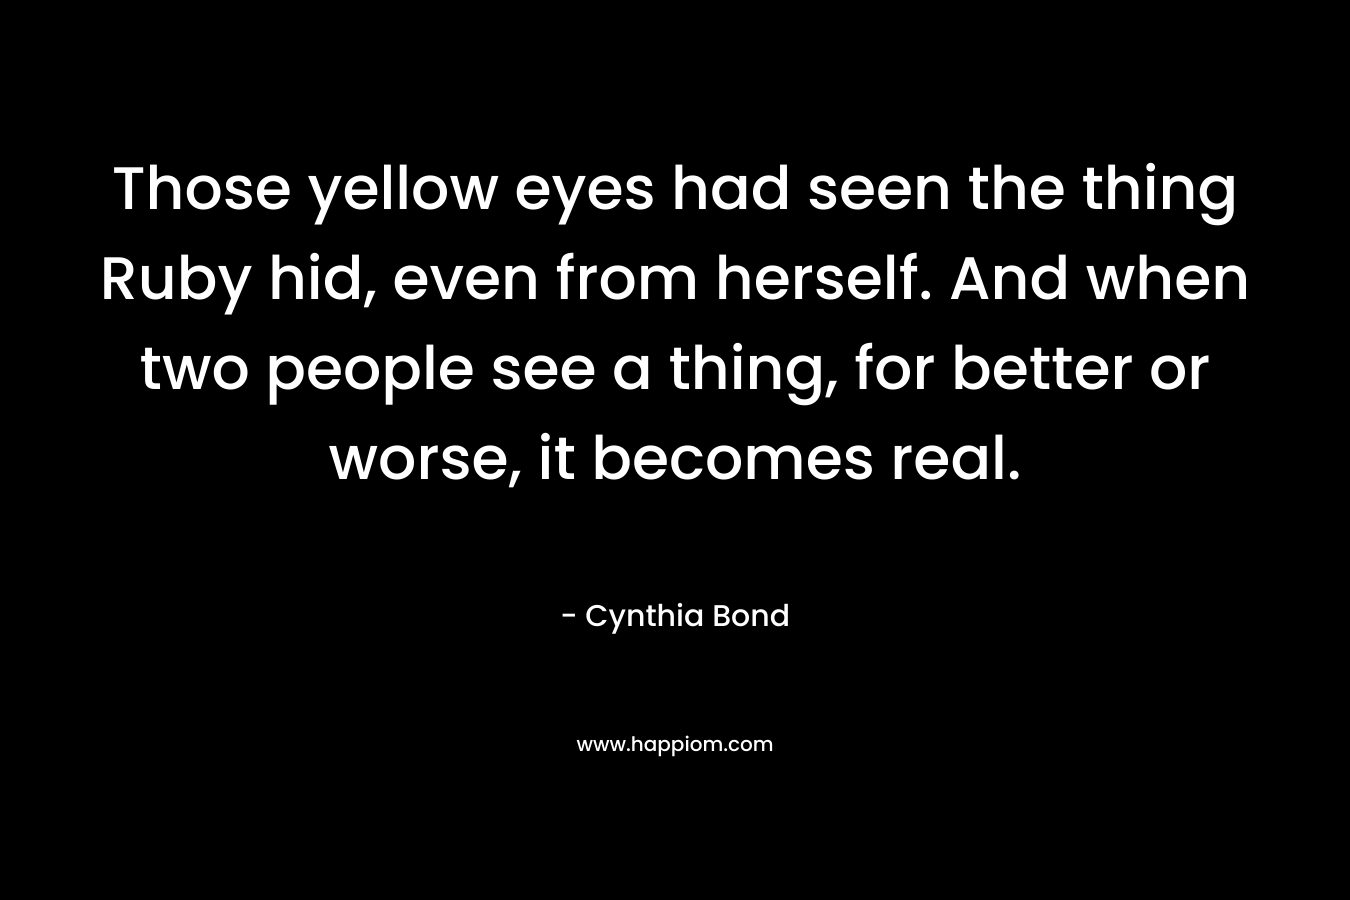 Those yellow eyes had seen the thing Ruby hid, even from herself. And when two people see a thing, for better or worse, it becomes real. – Cynthia Bond